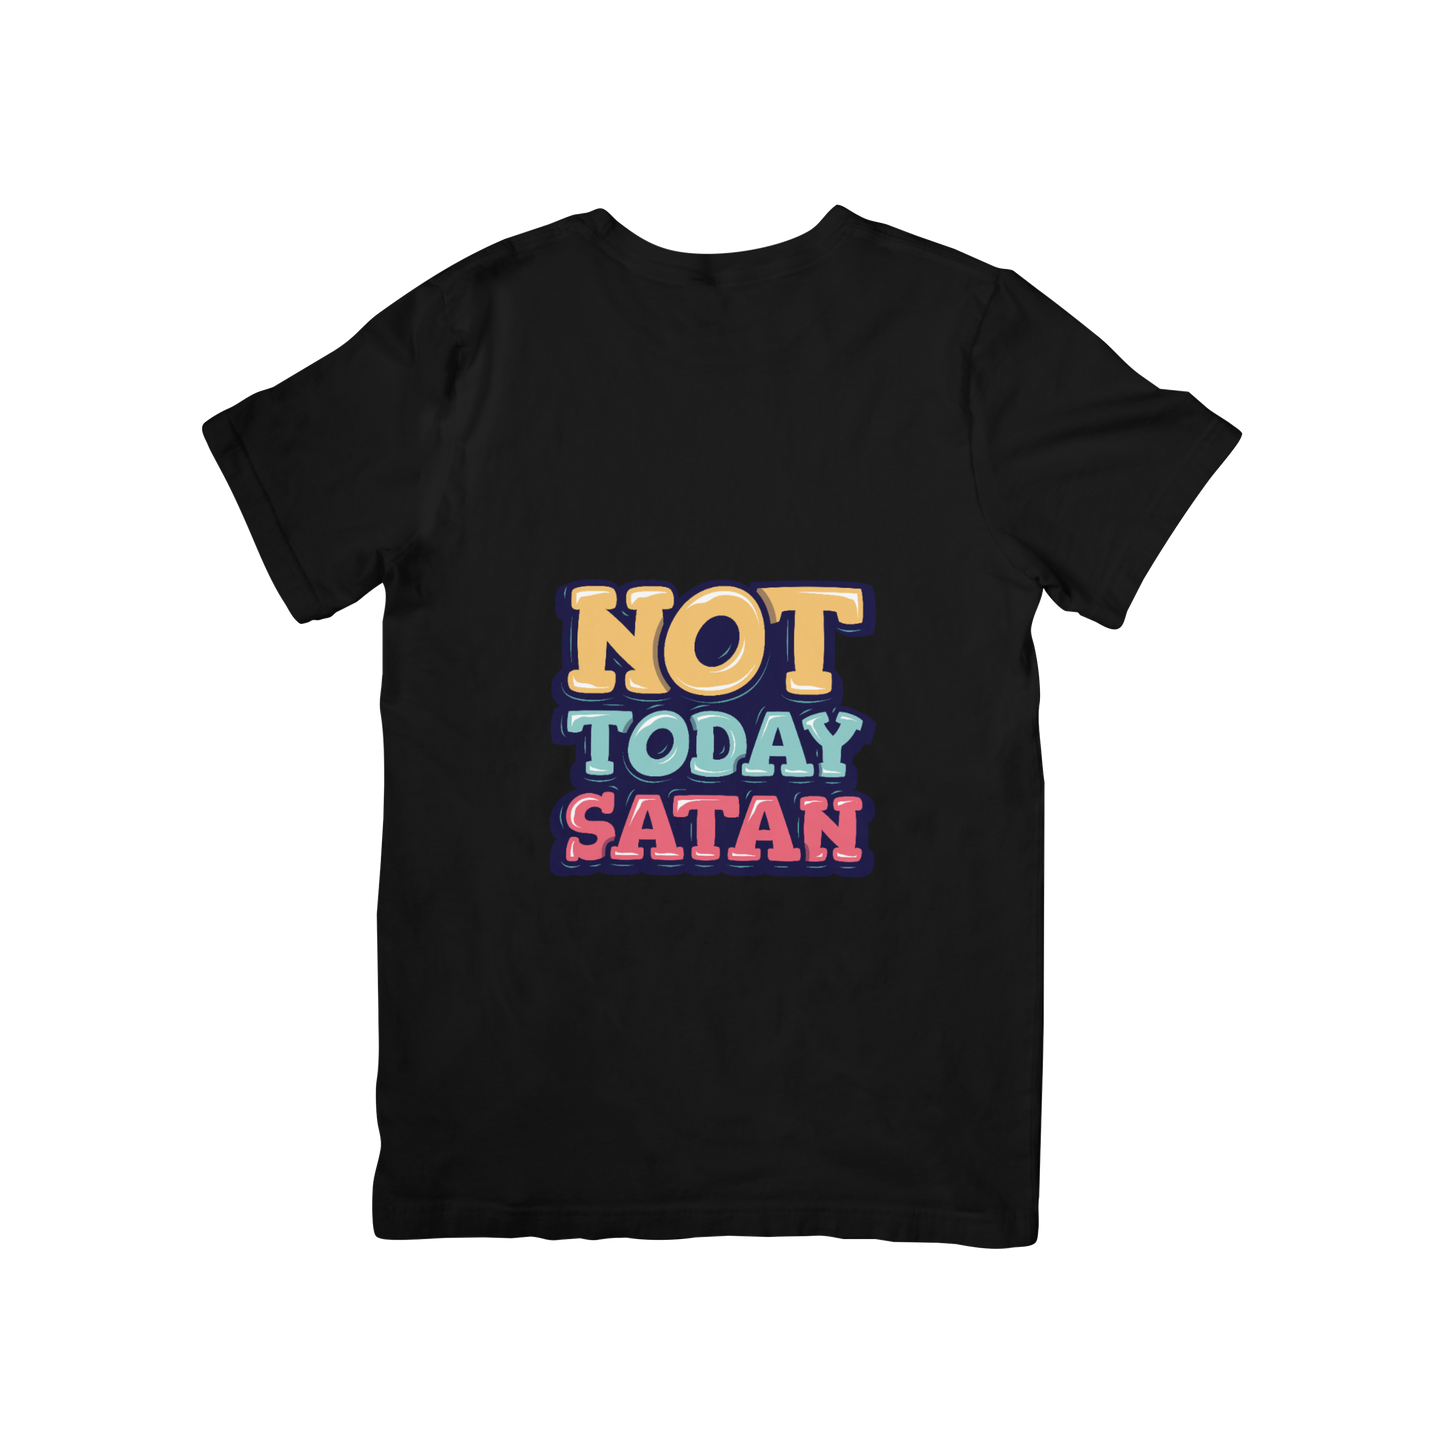 'Not today Satan' Quote T-shirt